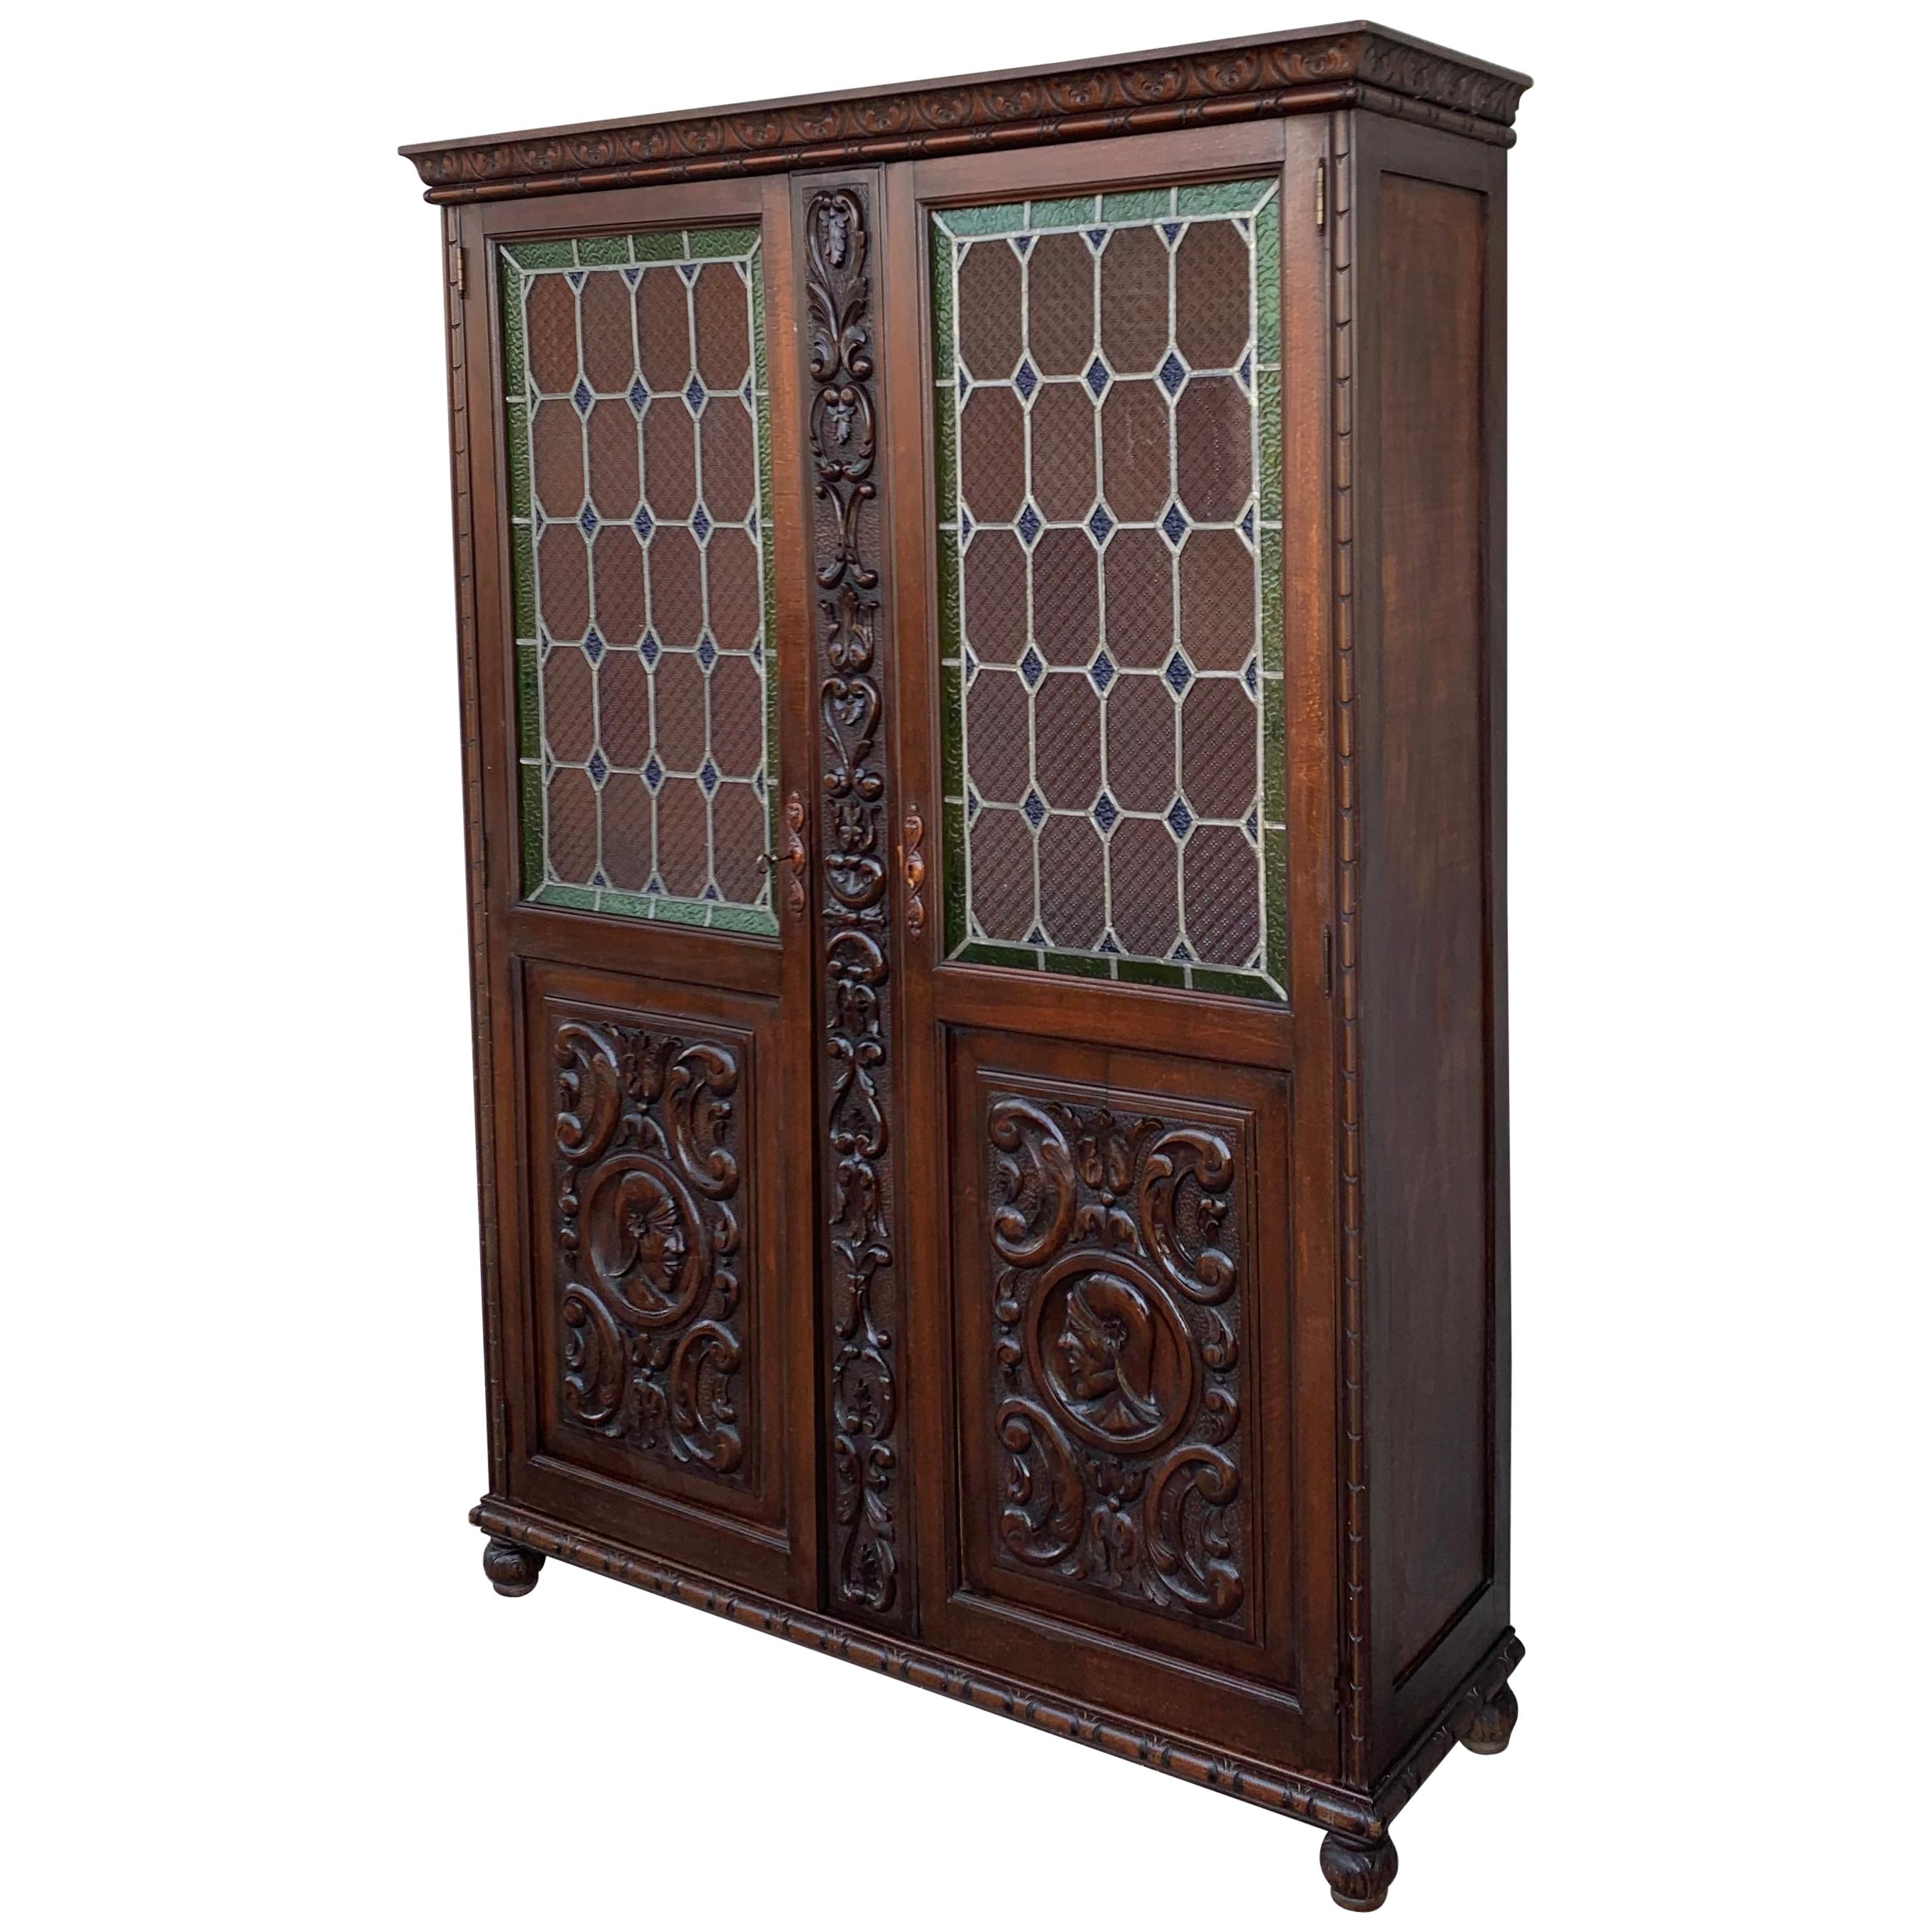 19th Century Spanish Walnut Cabinet or Bookcase with Stained Glass Doors